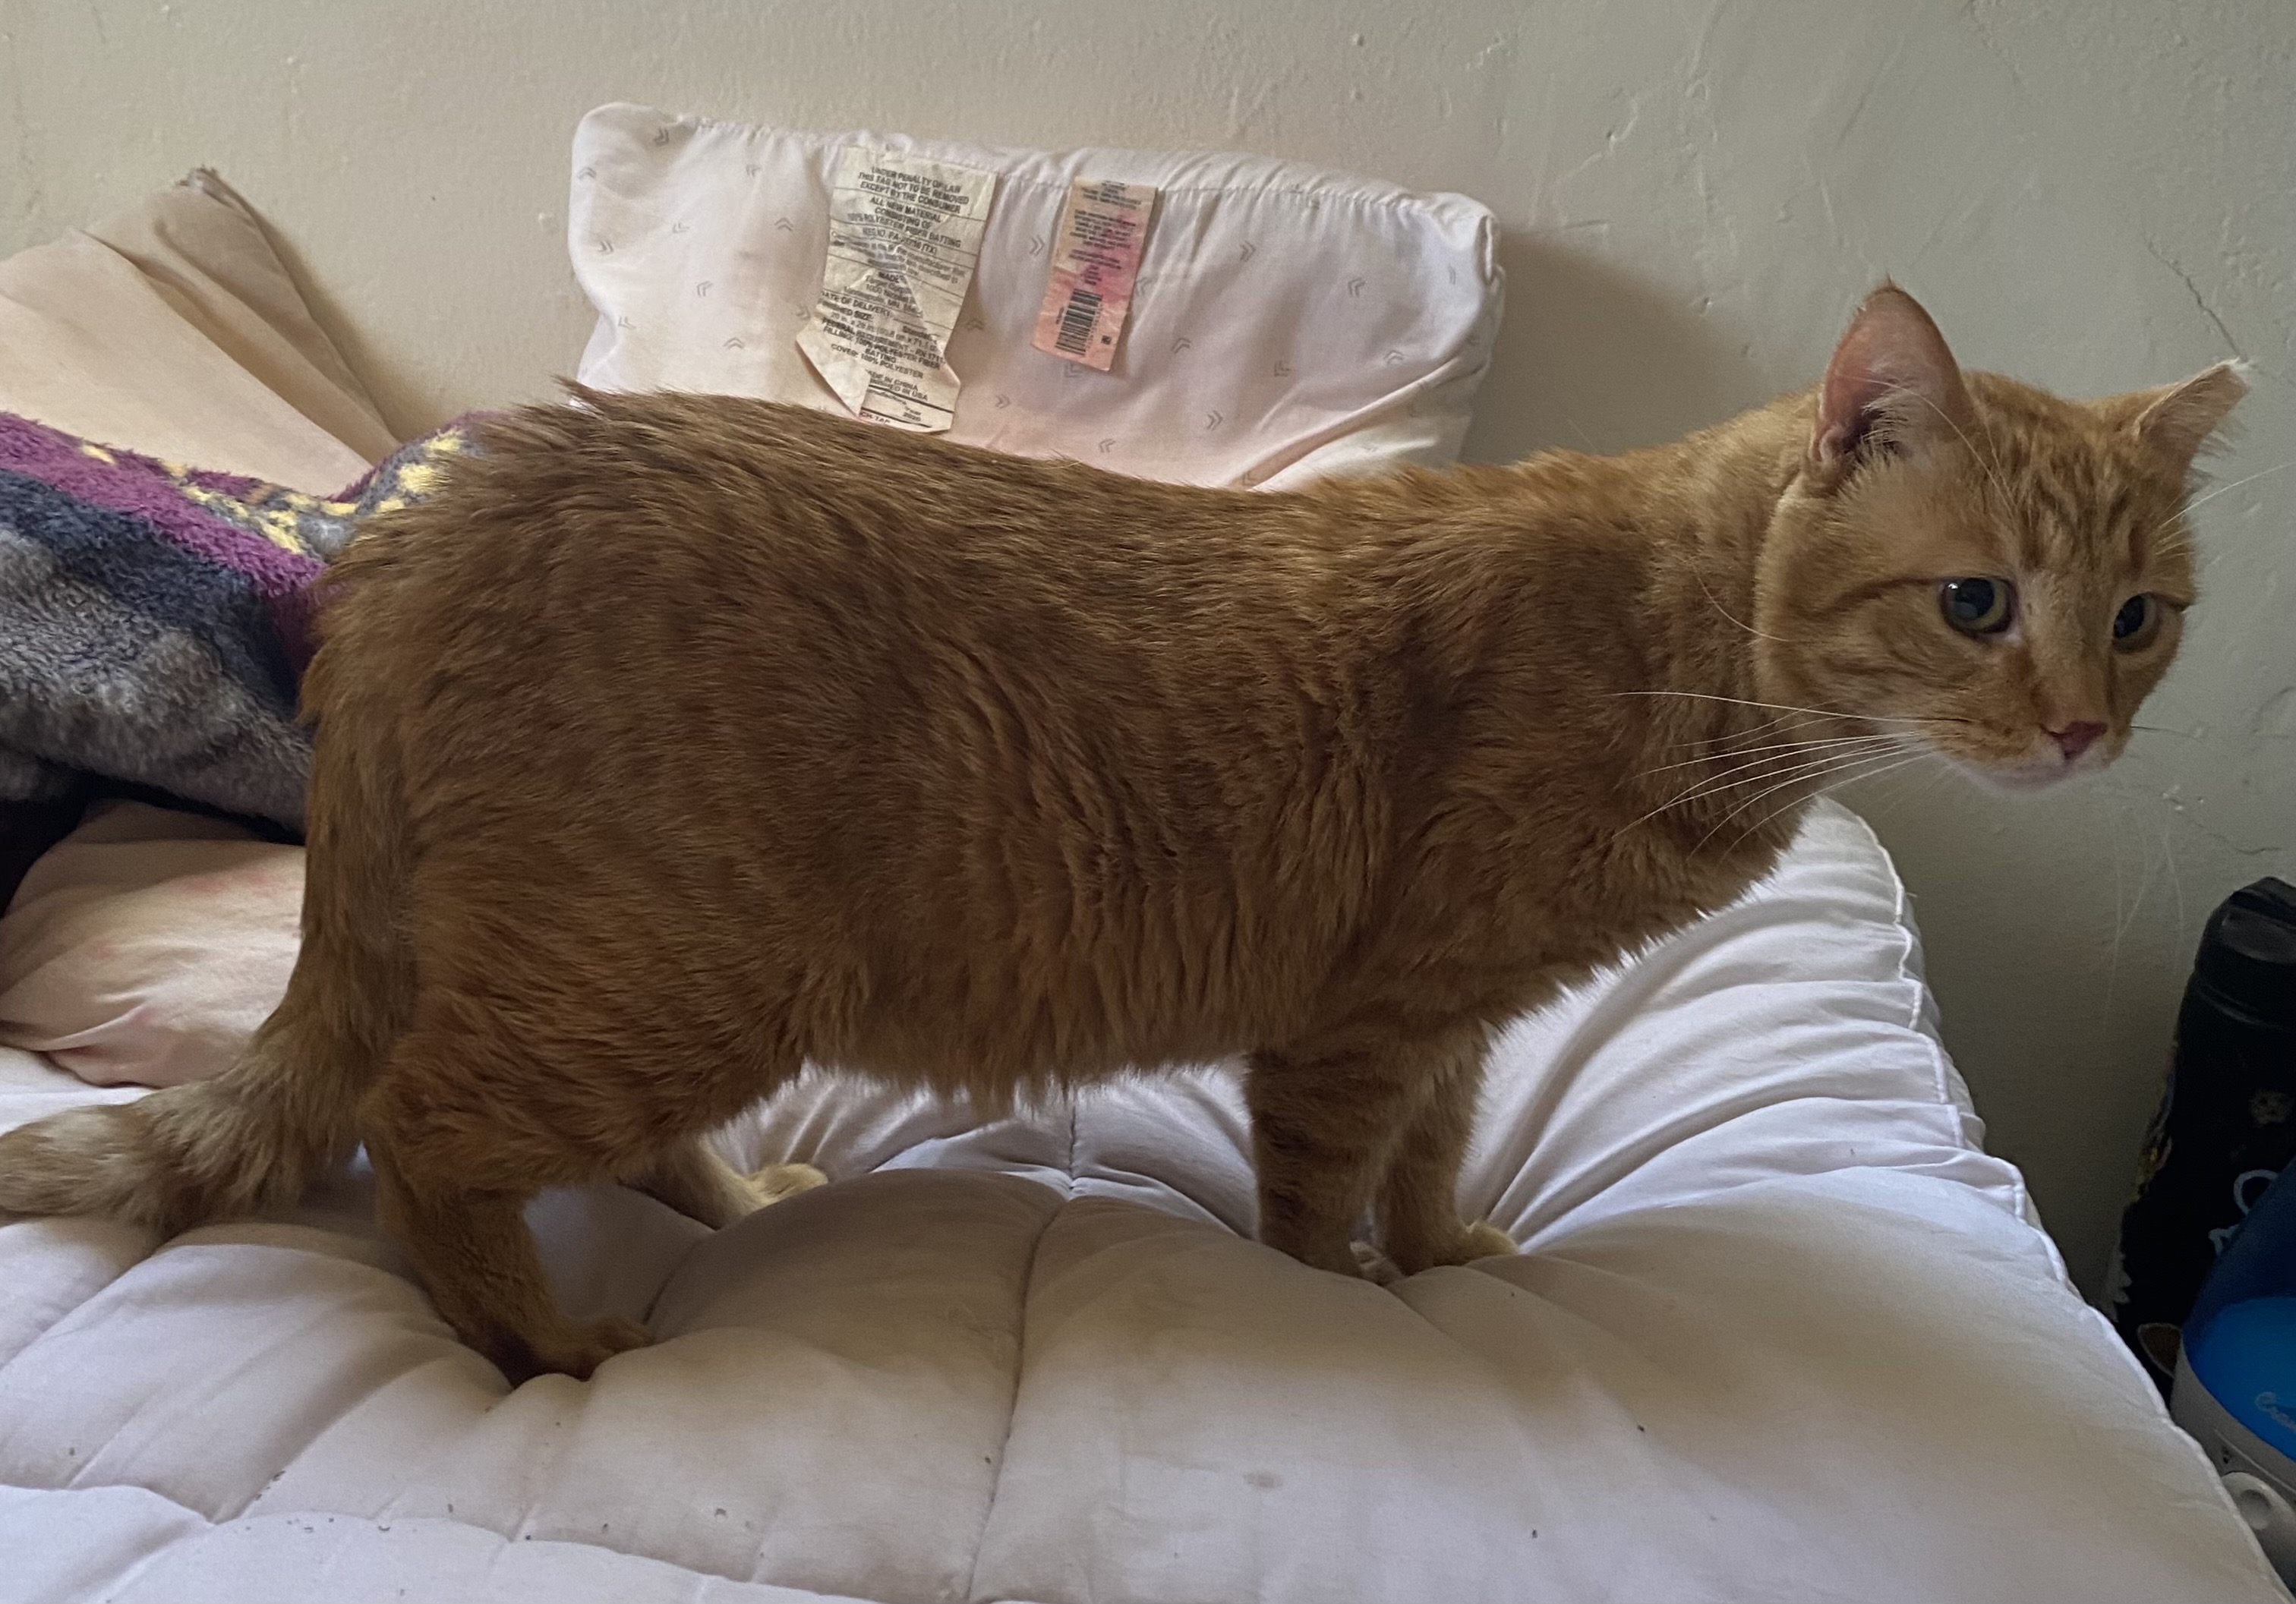 pot roast, an orage cat looking extra long on the bed and eggplant shapes, he's standing on all fours